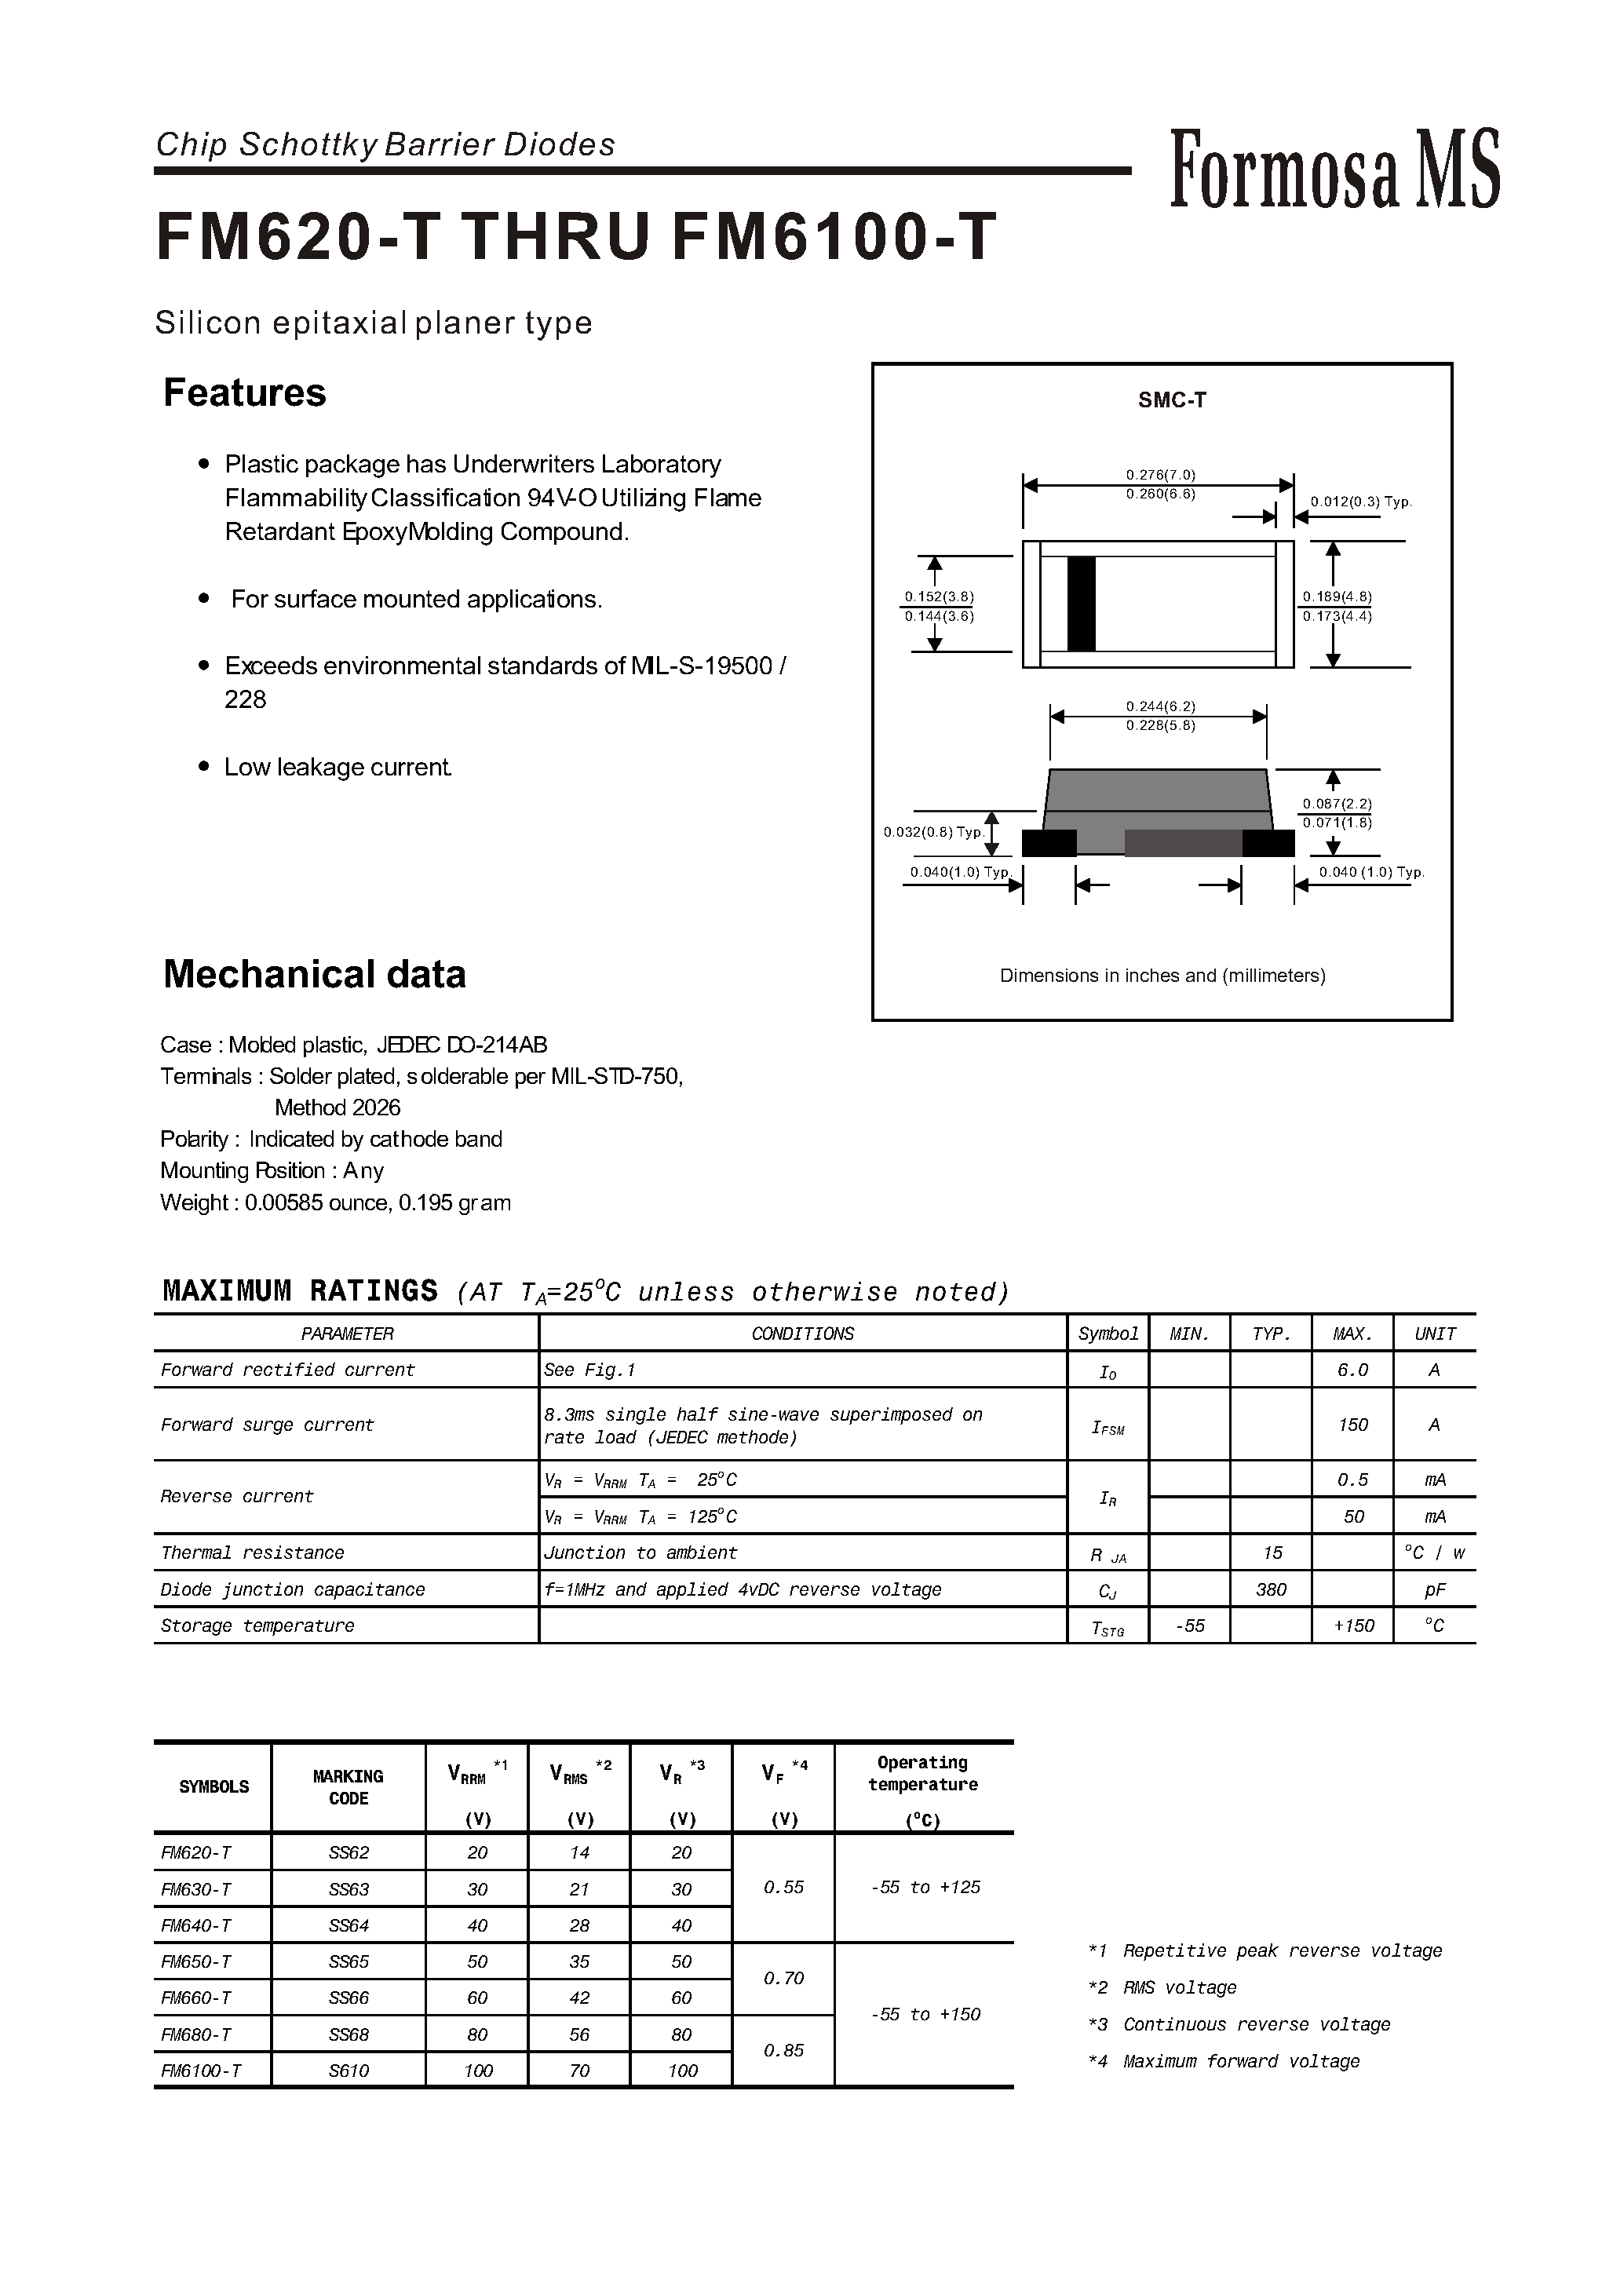 Datasheet FM6100-T - (FM620-T - FM6100-T) Chip Schottky Barrier Diodes - Silicon epitaxial planer type page 1